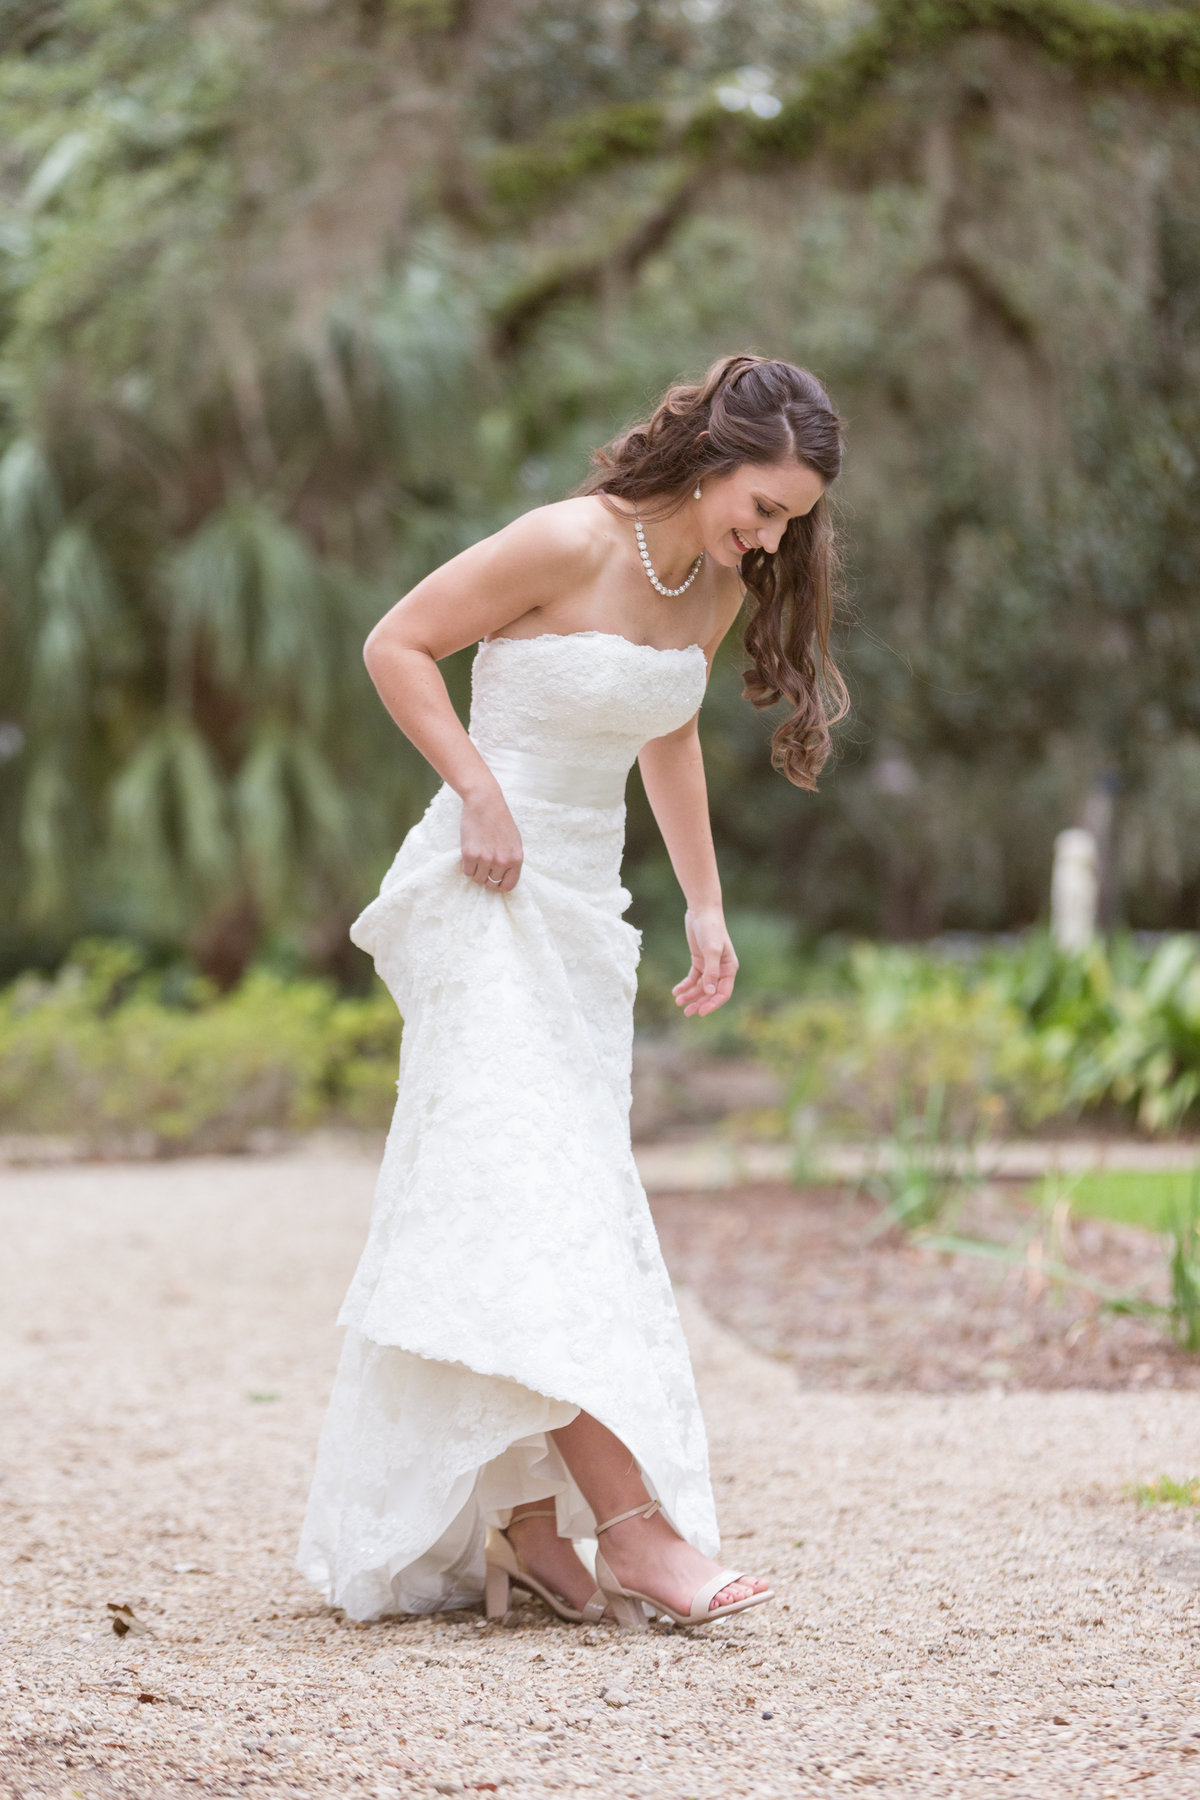 Photo of Kristen admiring her shoes during the bridal session at Goodwood House & Museum in Tallahassee, Florida..